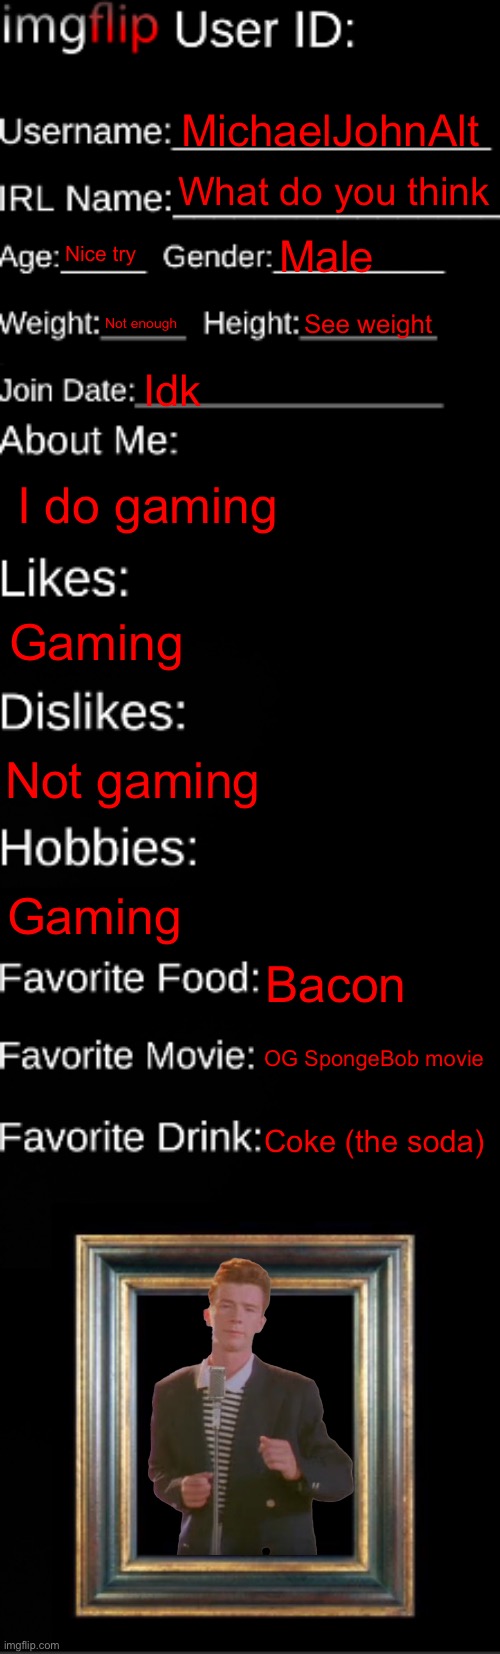 imgflip ID Card | MichaelJohnAlt; What do you think; Nice try; Male; Not enough; See weight; Idk; I do gaming; Gaming; Not gaming; Gaming; Bacon; OG SpongeBob movie; Coke (the soda) | image tagged in imgflip id card | made w/ Imgflip meme maker